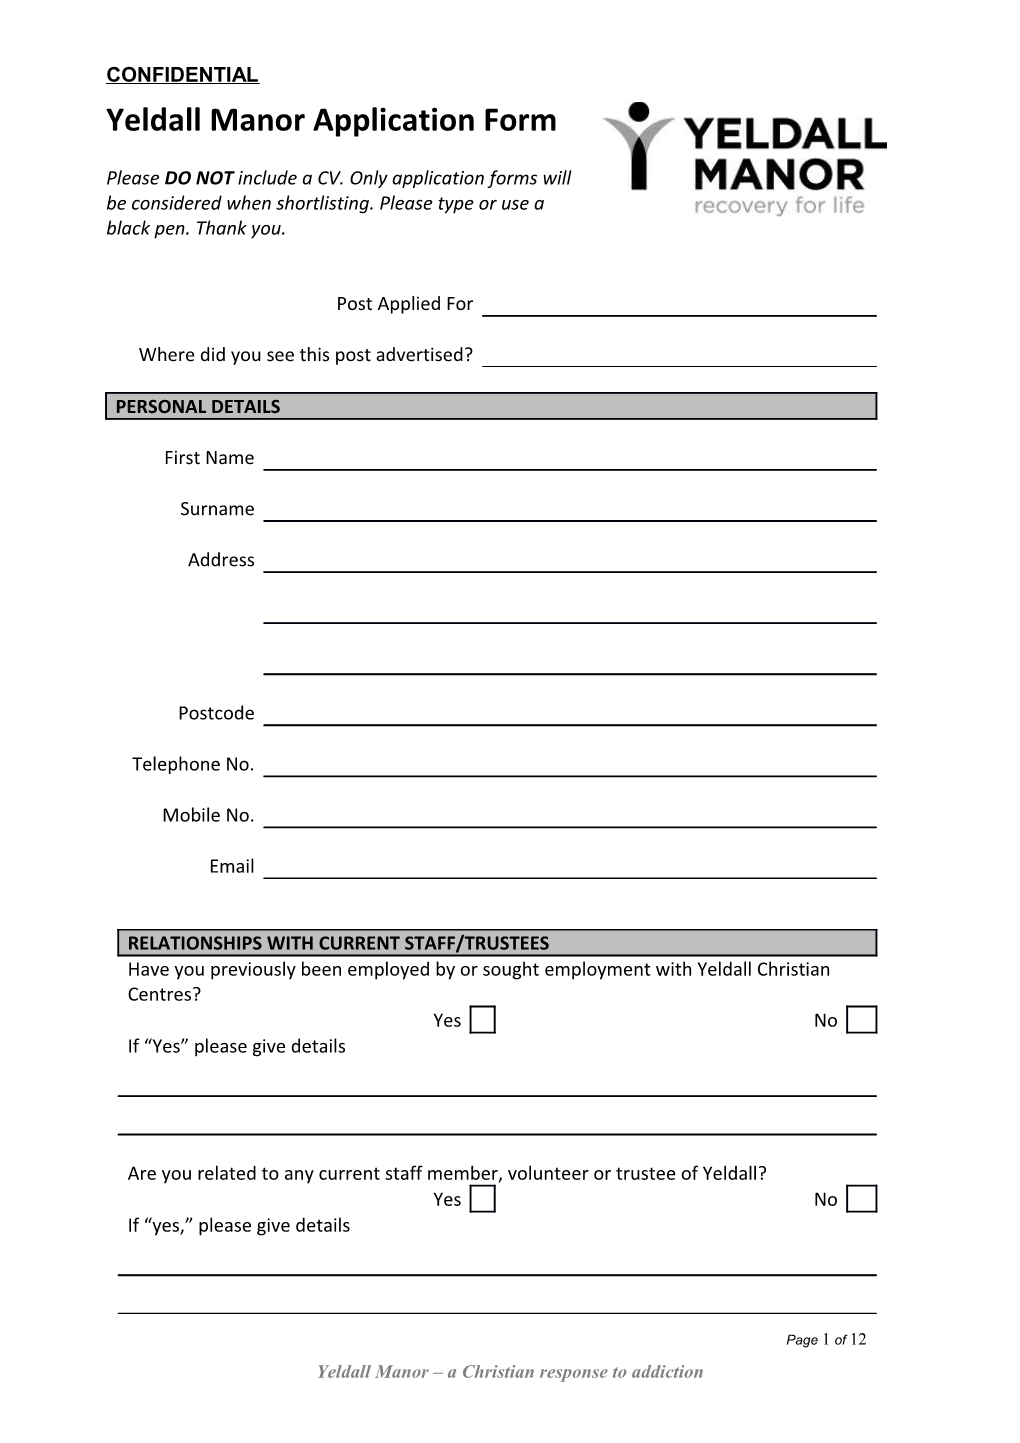 Please Refer to the Enclosed Guidelines When Completing Your Application Form